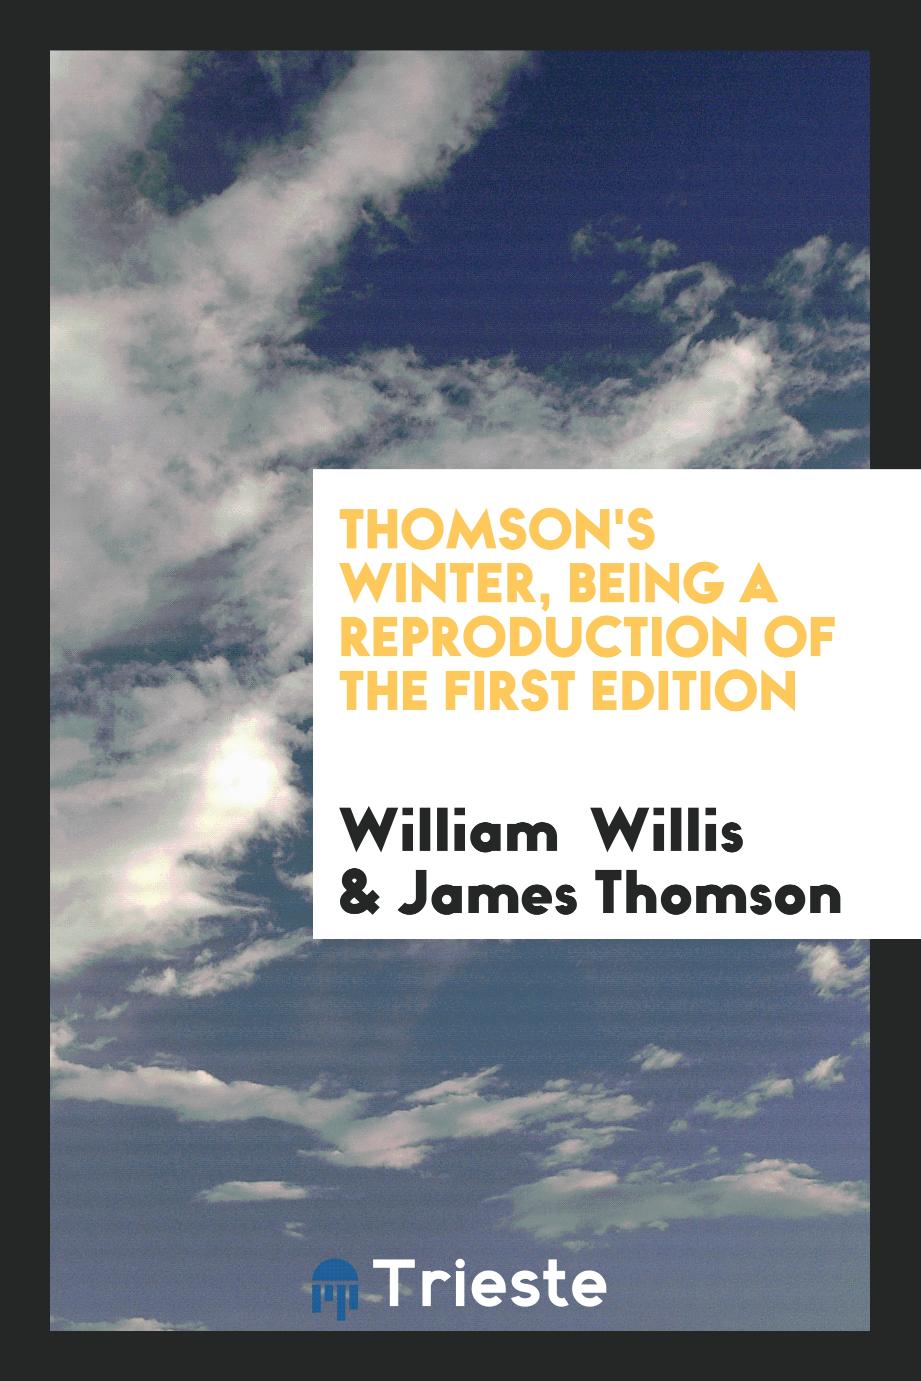 William Willis, James Thomson - Thomson's Winter, being a reproduction of the first edition